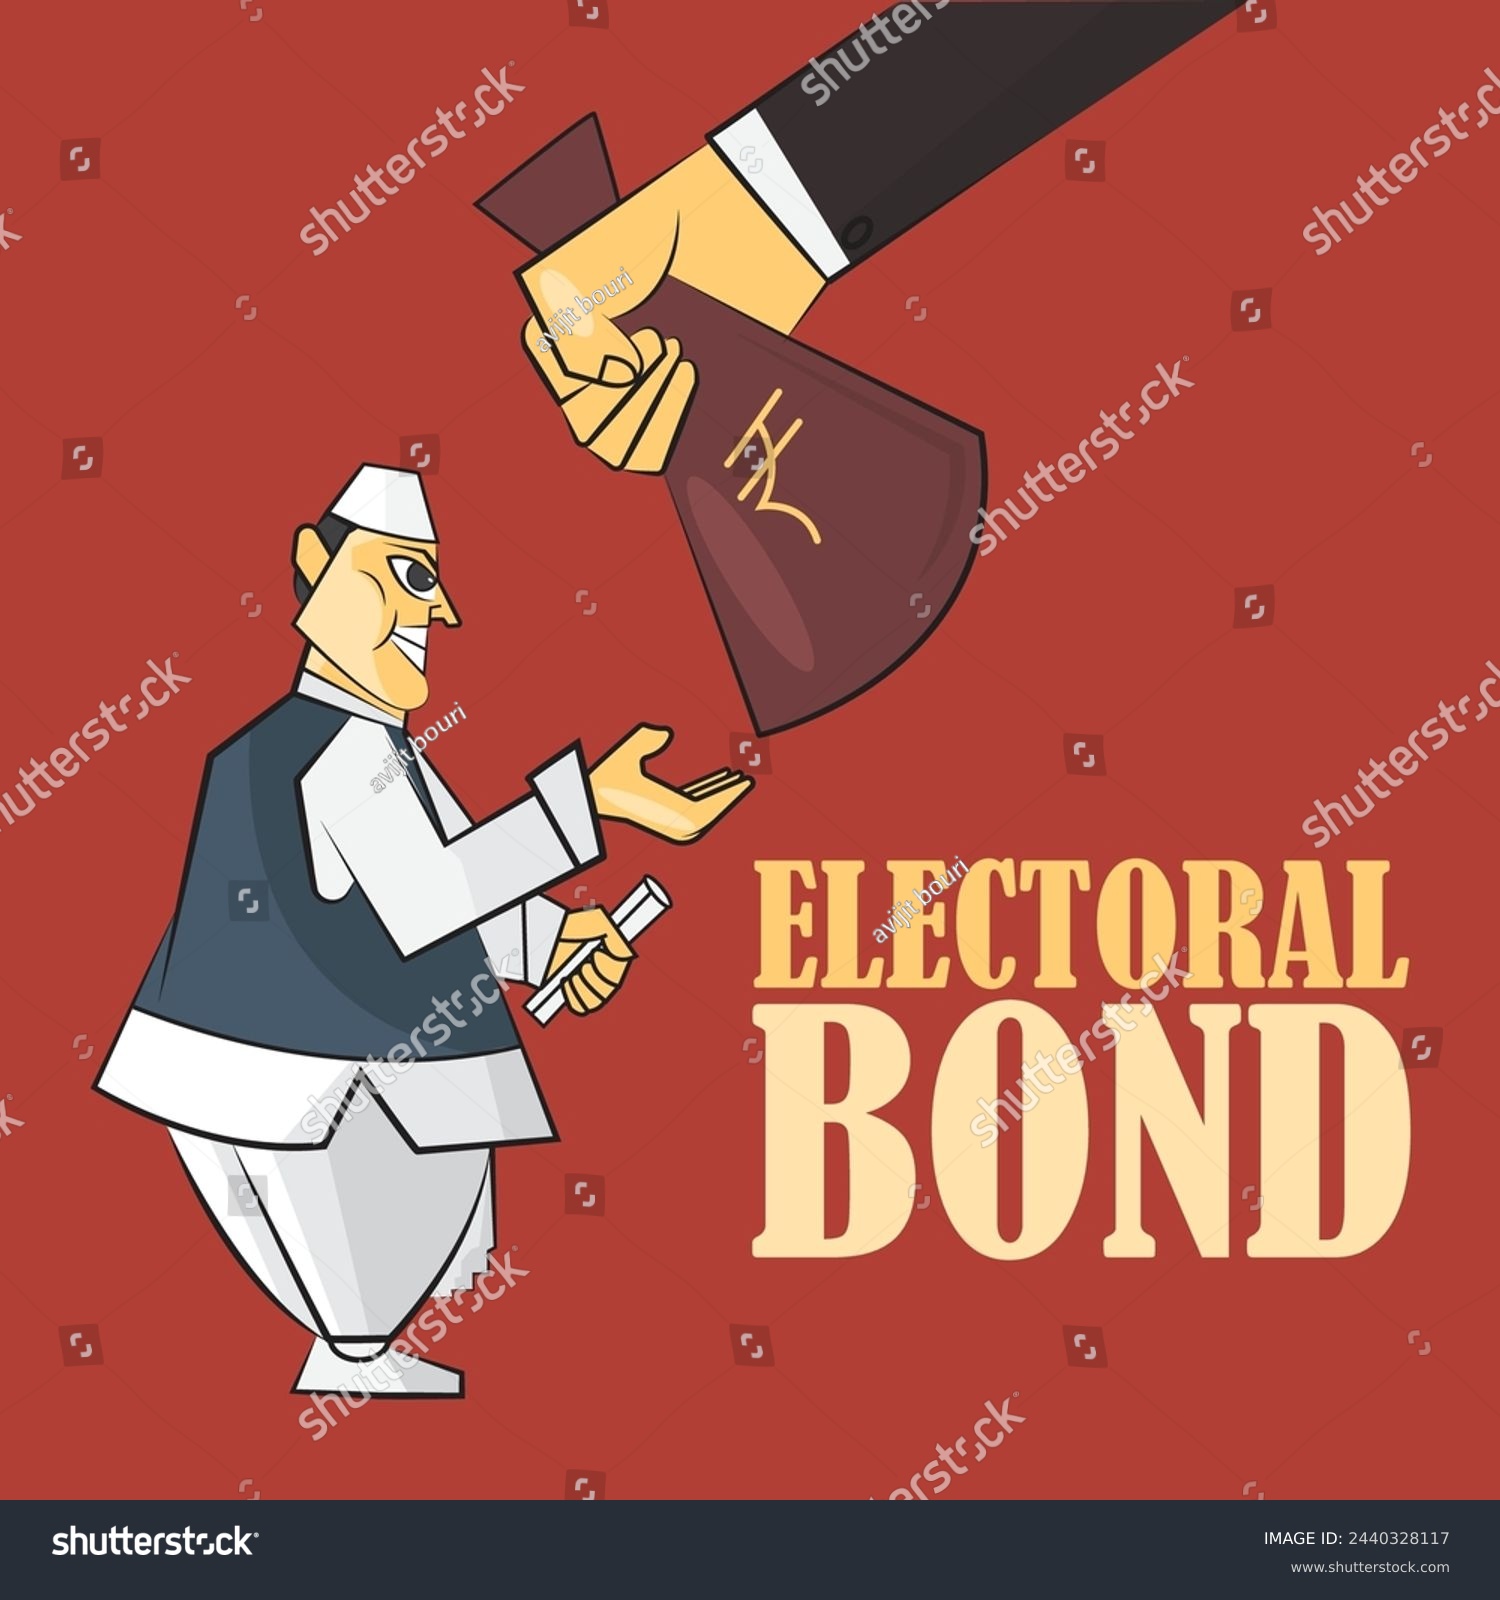 SVG of Indian politician with electoral bond imaginary vector character.  svg